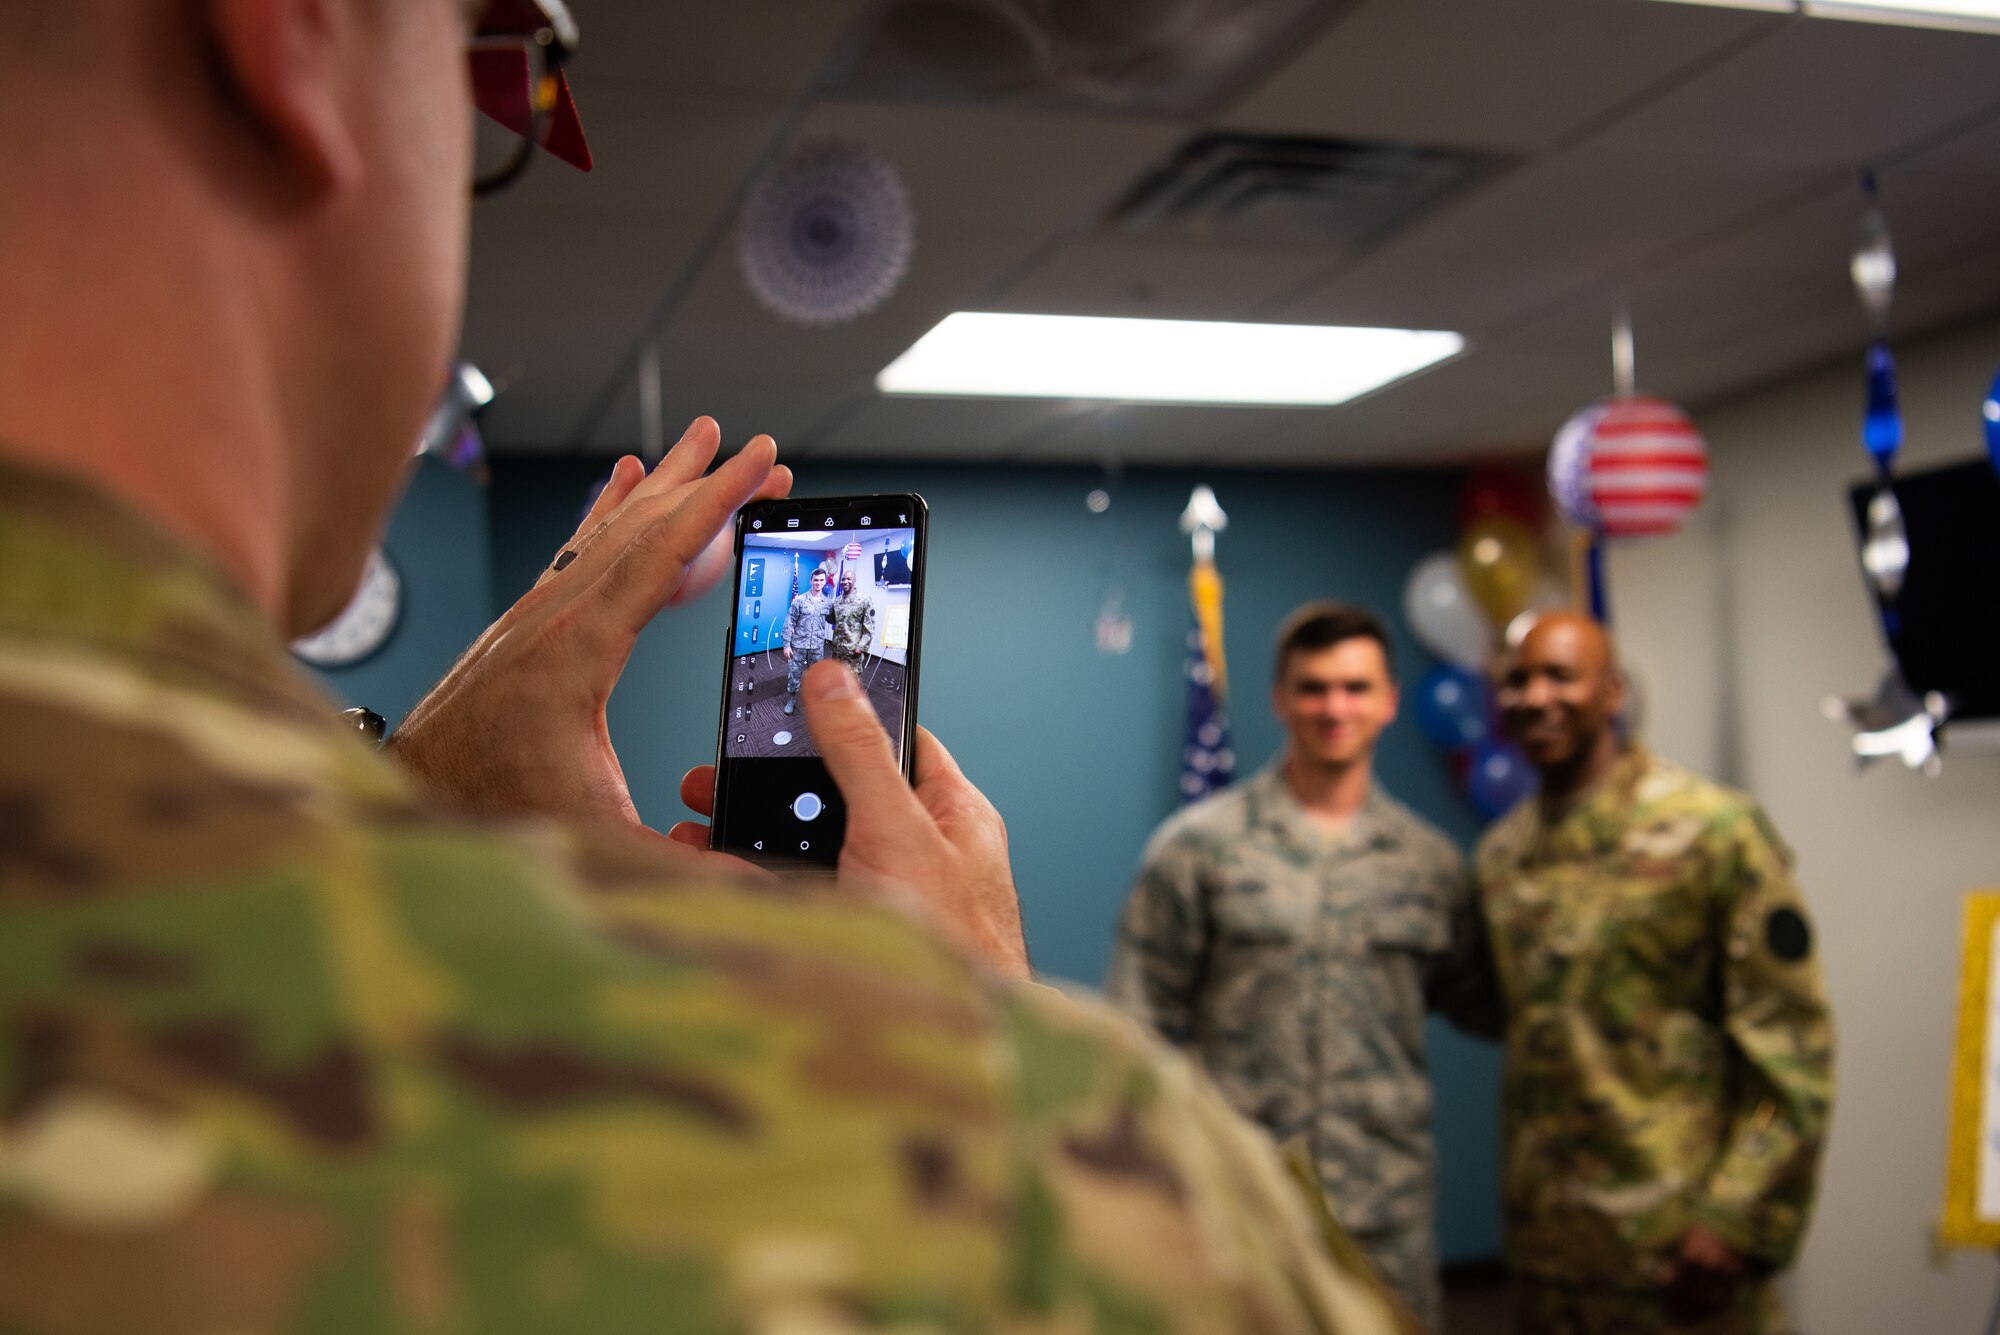 Chief Master Sgt. of the Air Force Kaleth O. Wright poses with an Airman for a photo during a meet and greet in the 56th Medical Group, Oct. 22, 2018 at Luke Air Force Base, Ariz.